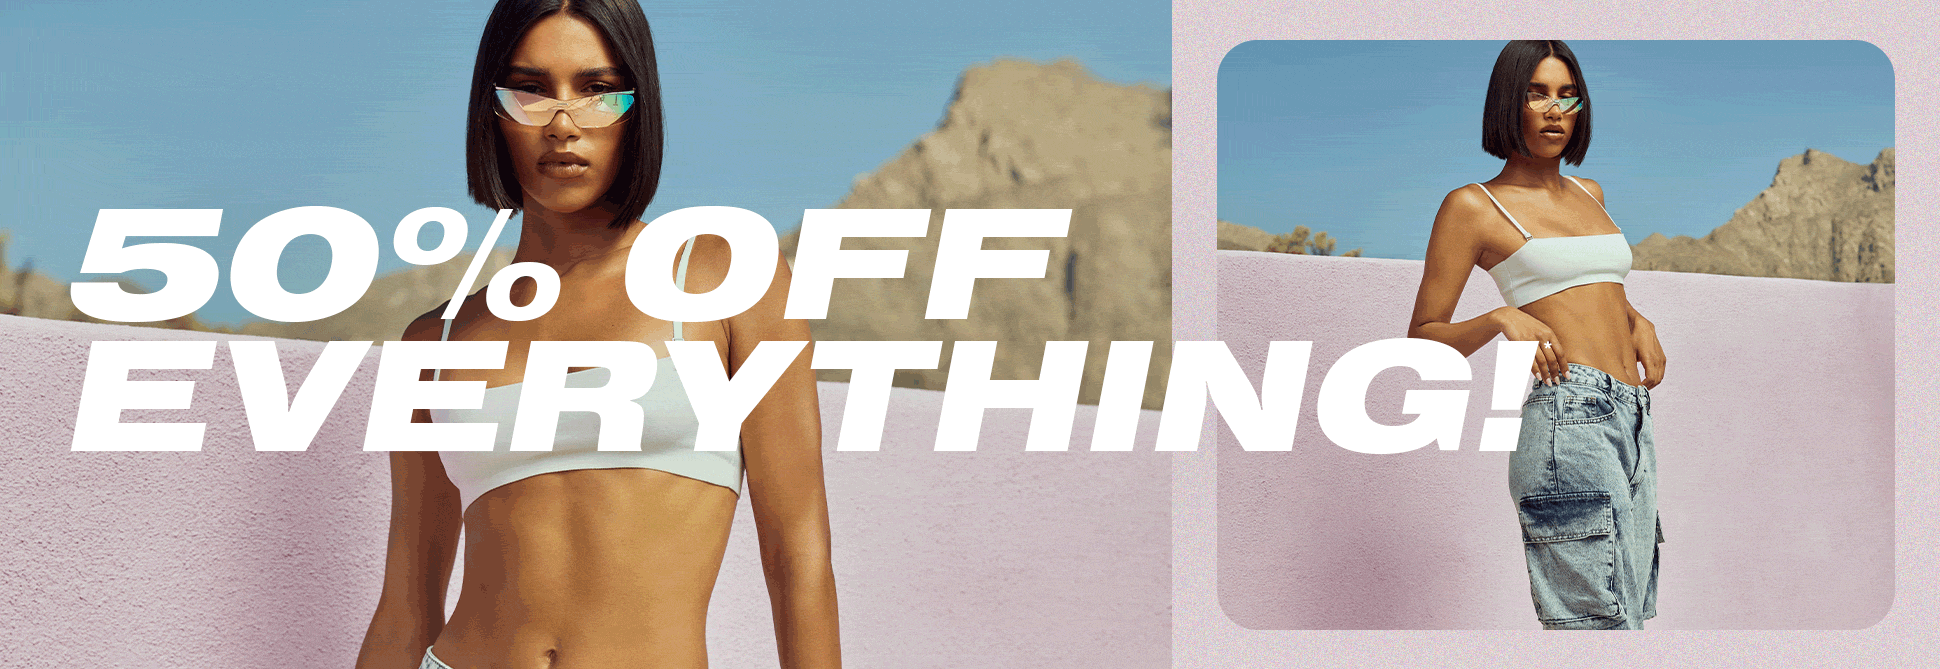 50% OFF everything at Boohoo for a limited time